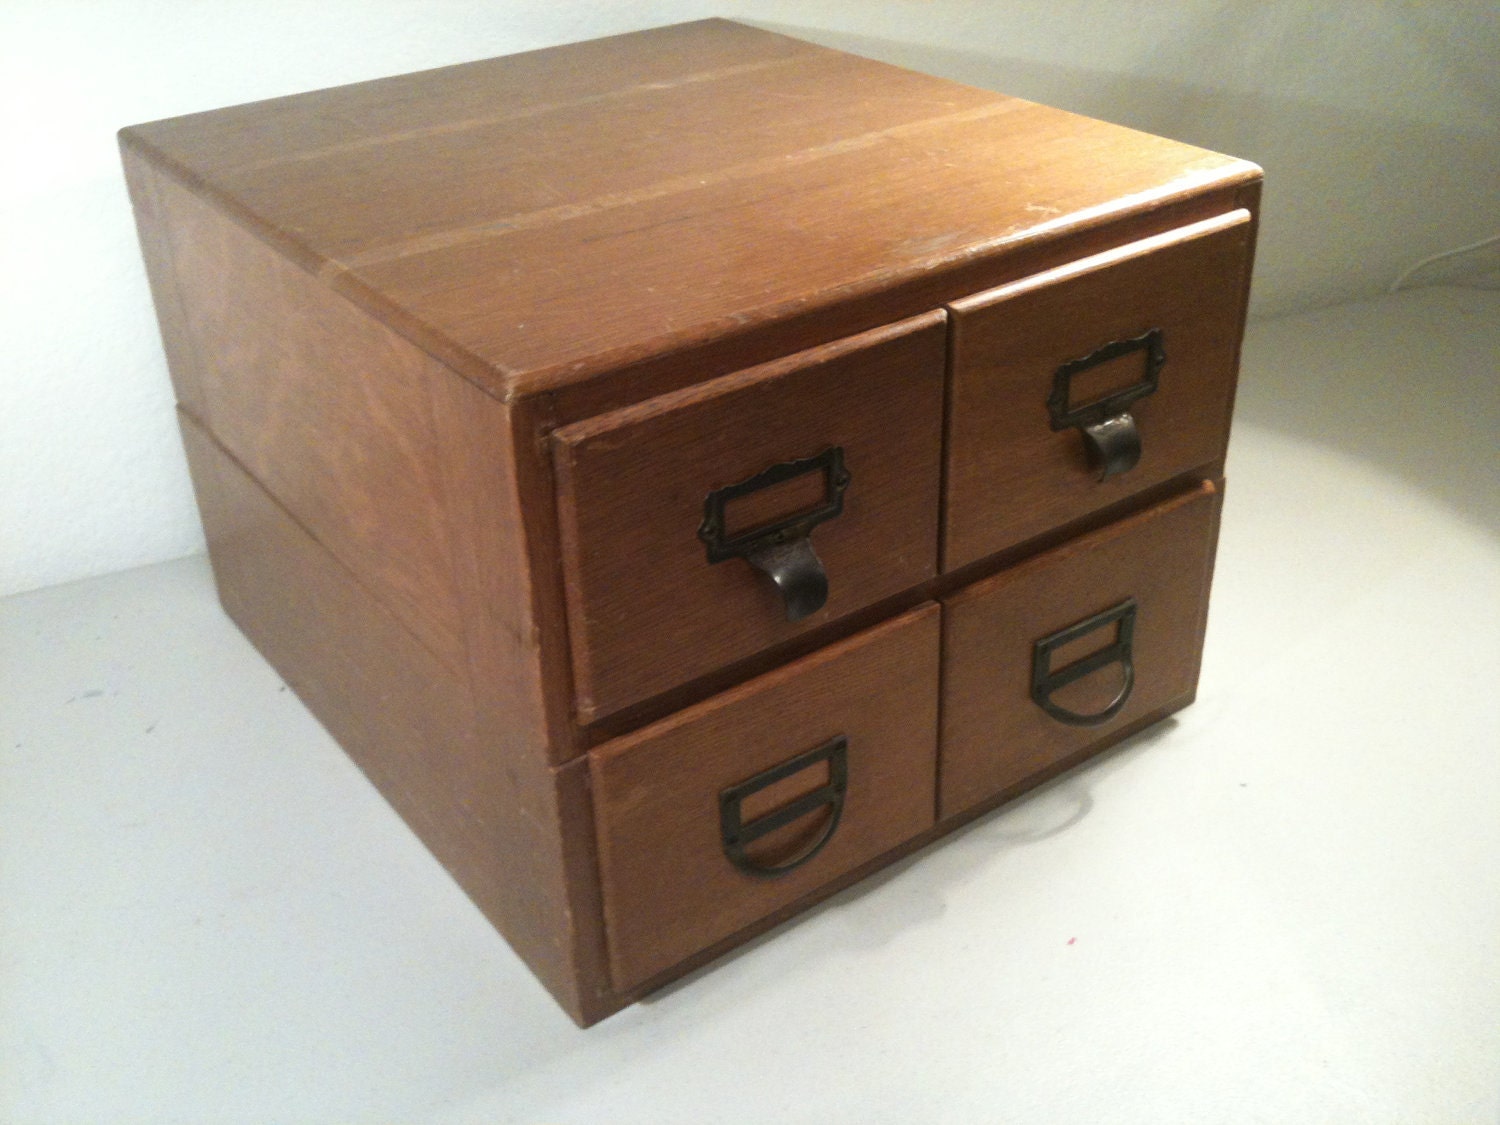 Library Index Card Catalog 4 Drawer Wood Box Vintage Office